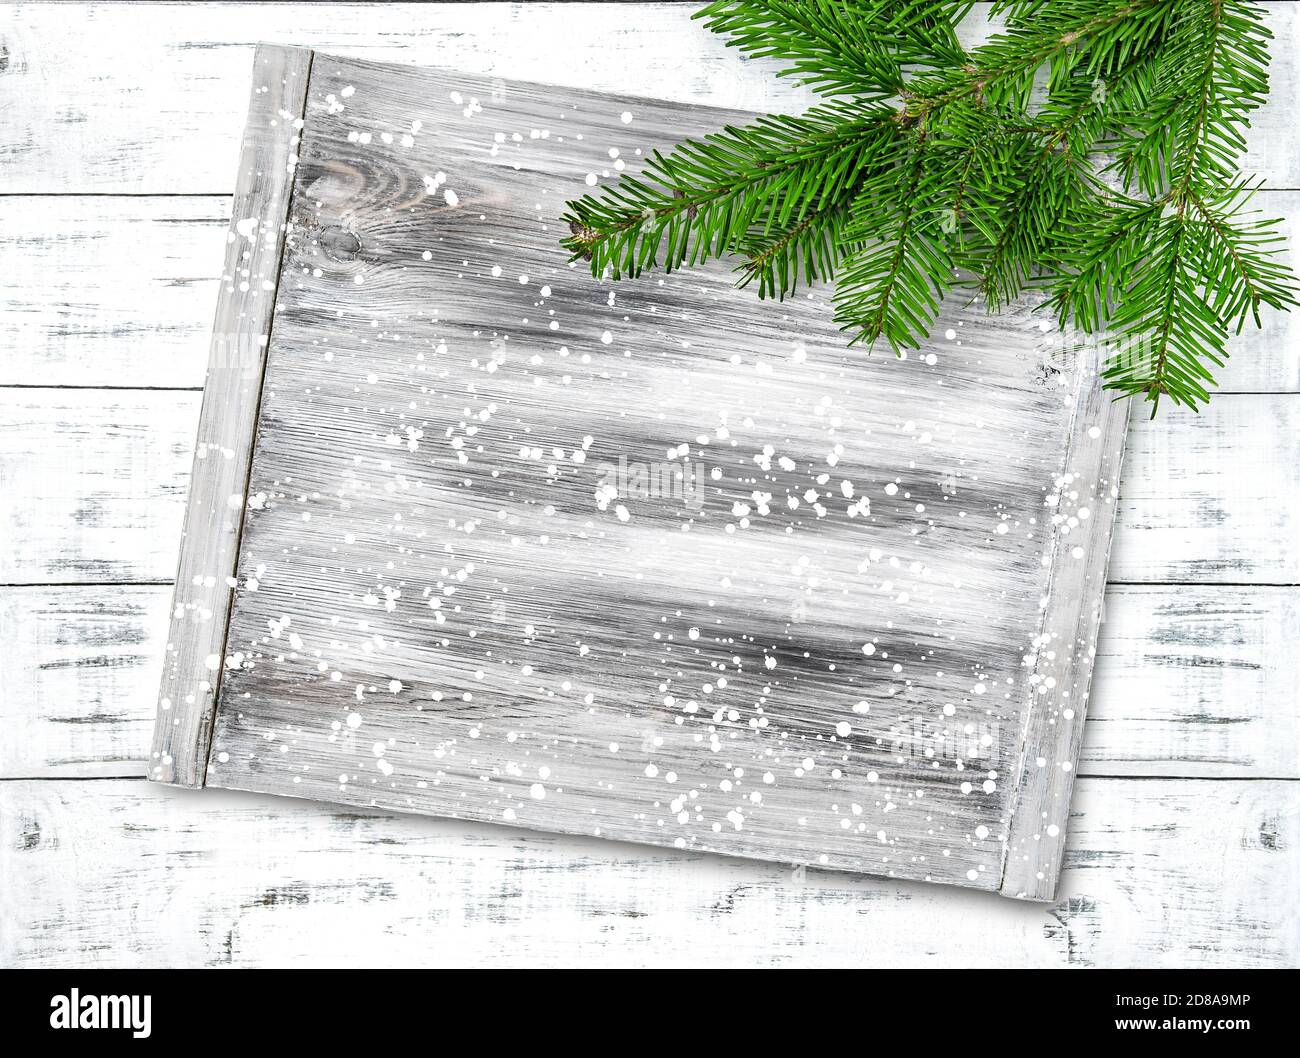 Christmas tree branches and wooden sign desk board mockup Stock Photo